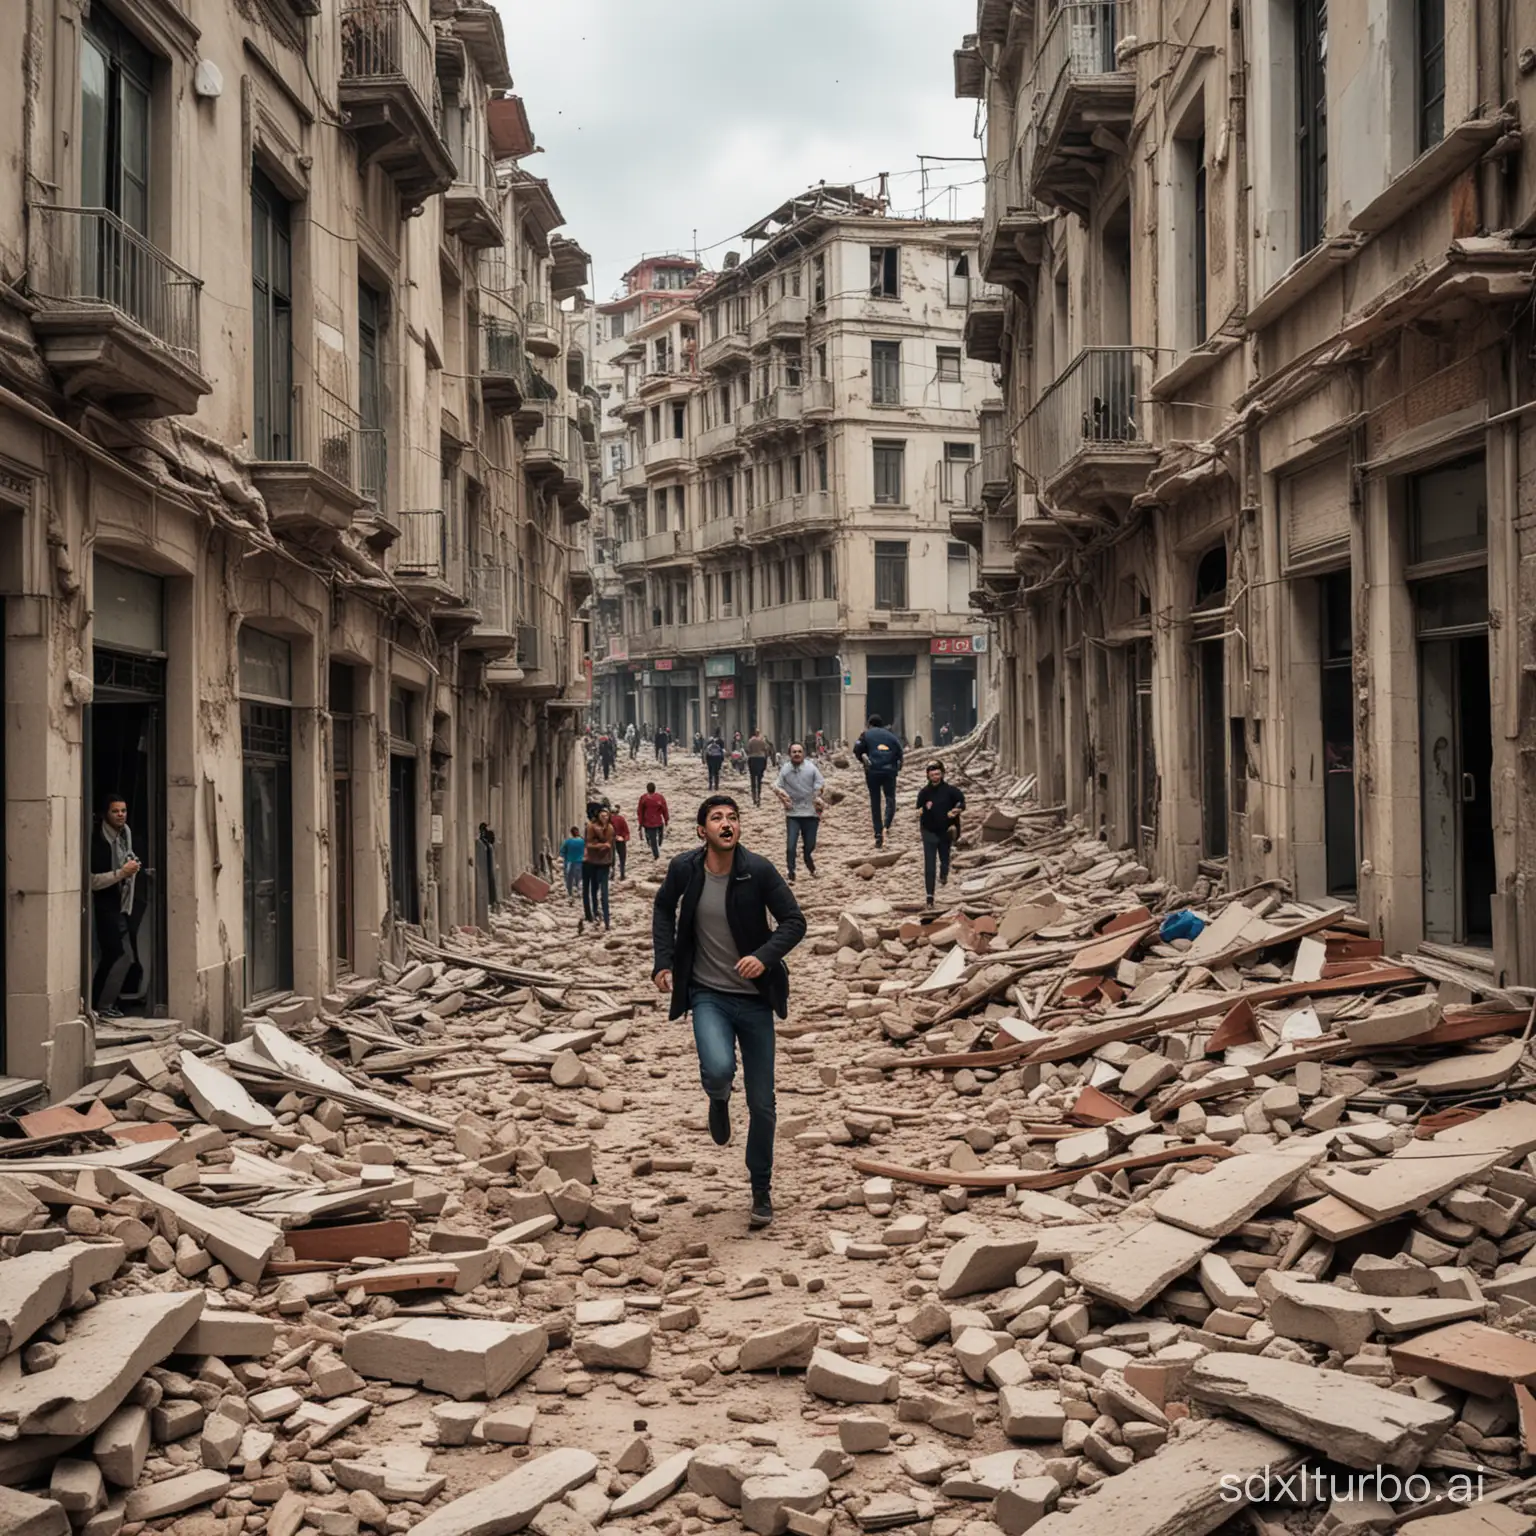 Let there be frantic people running among collapsed buildings in the streets of Istanbul.